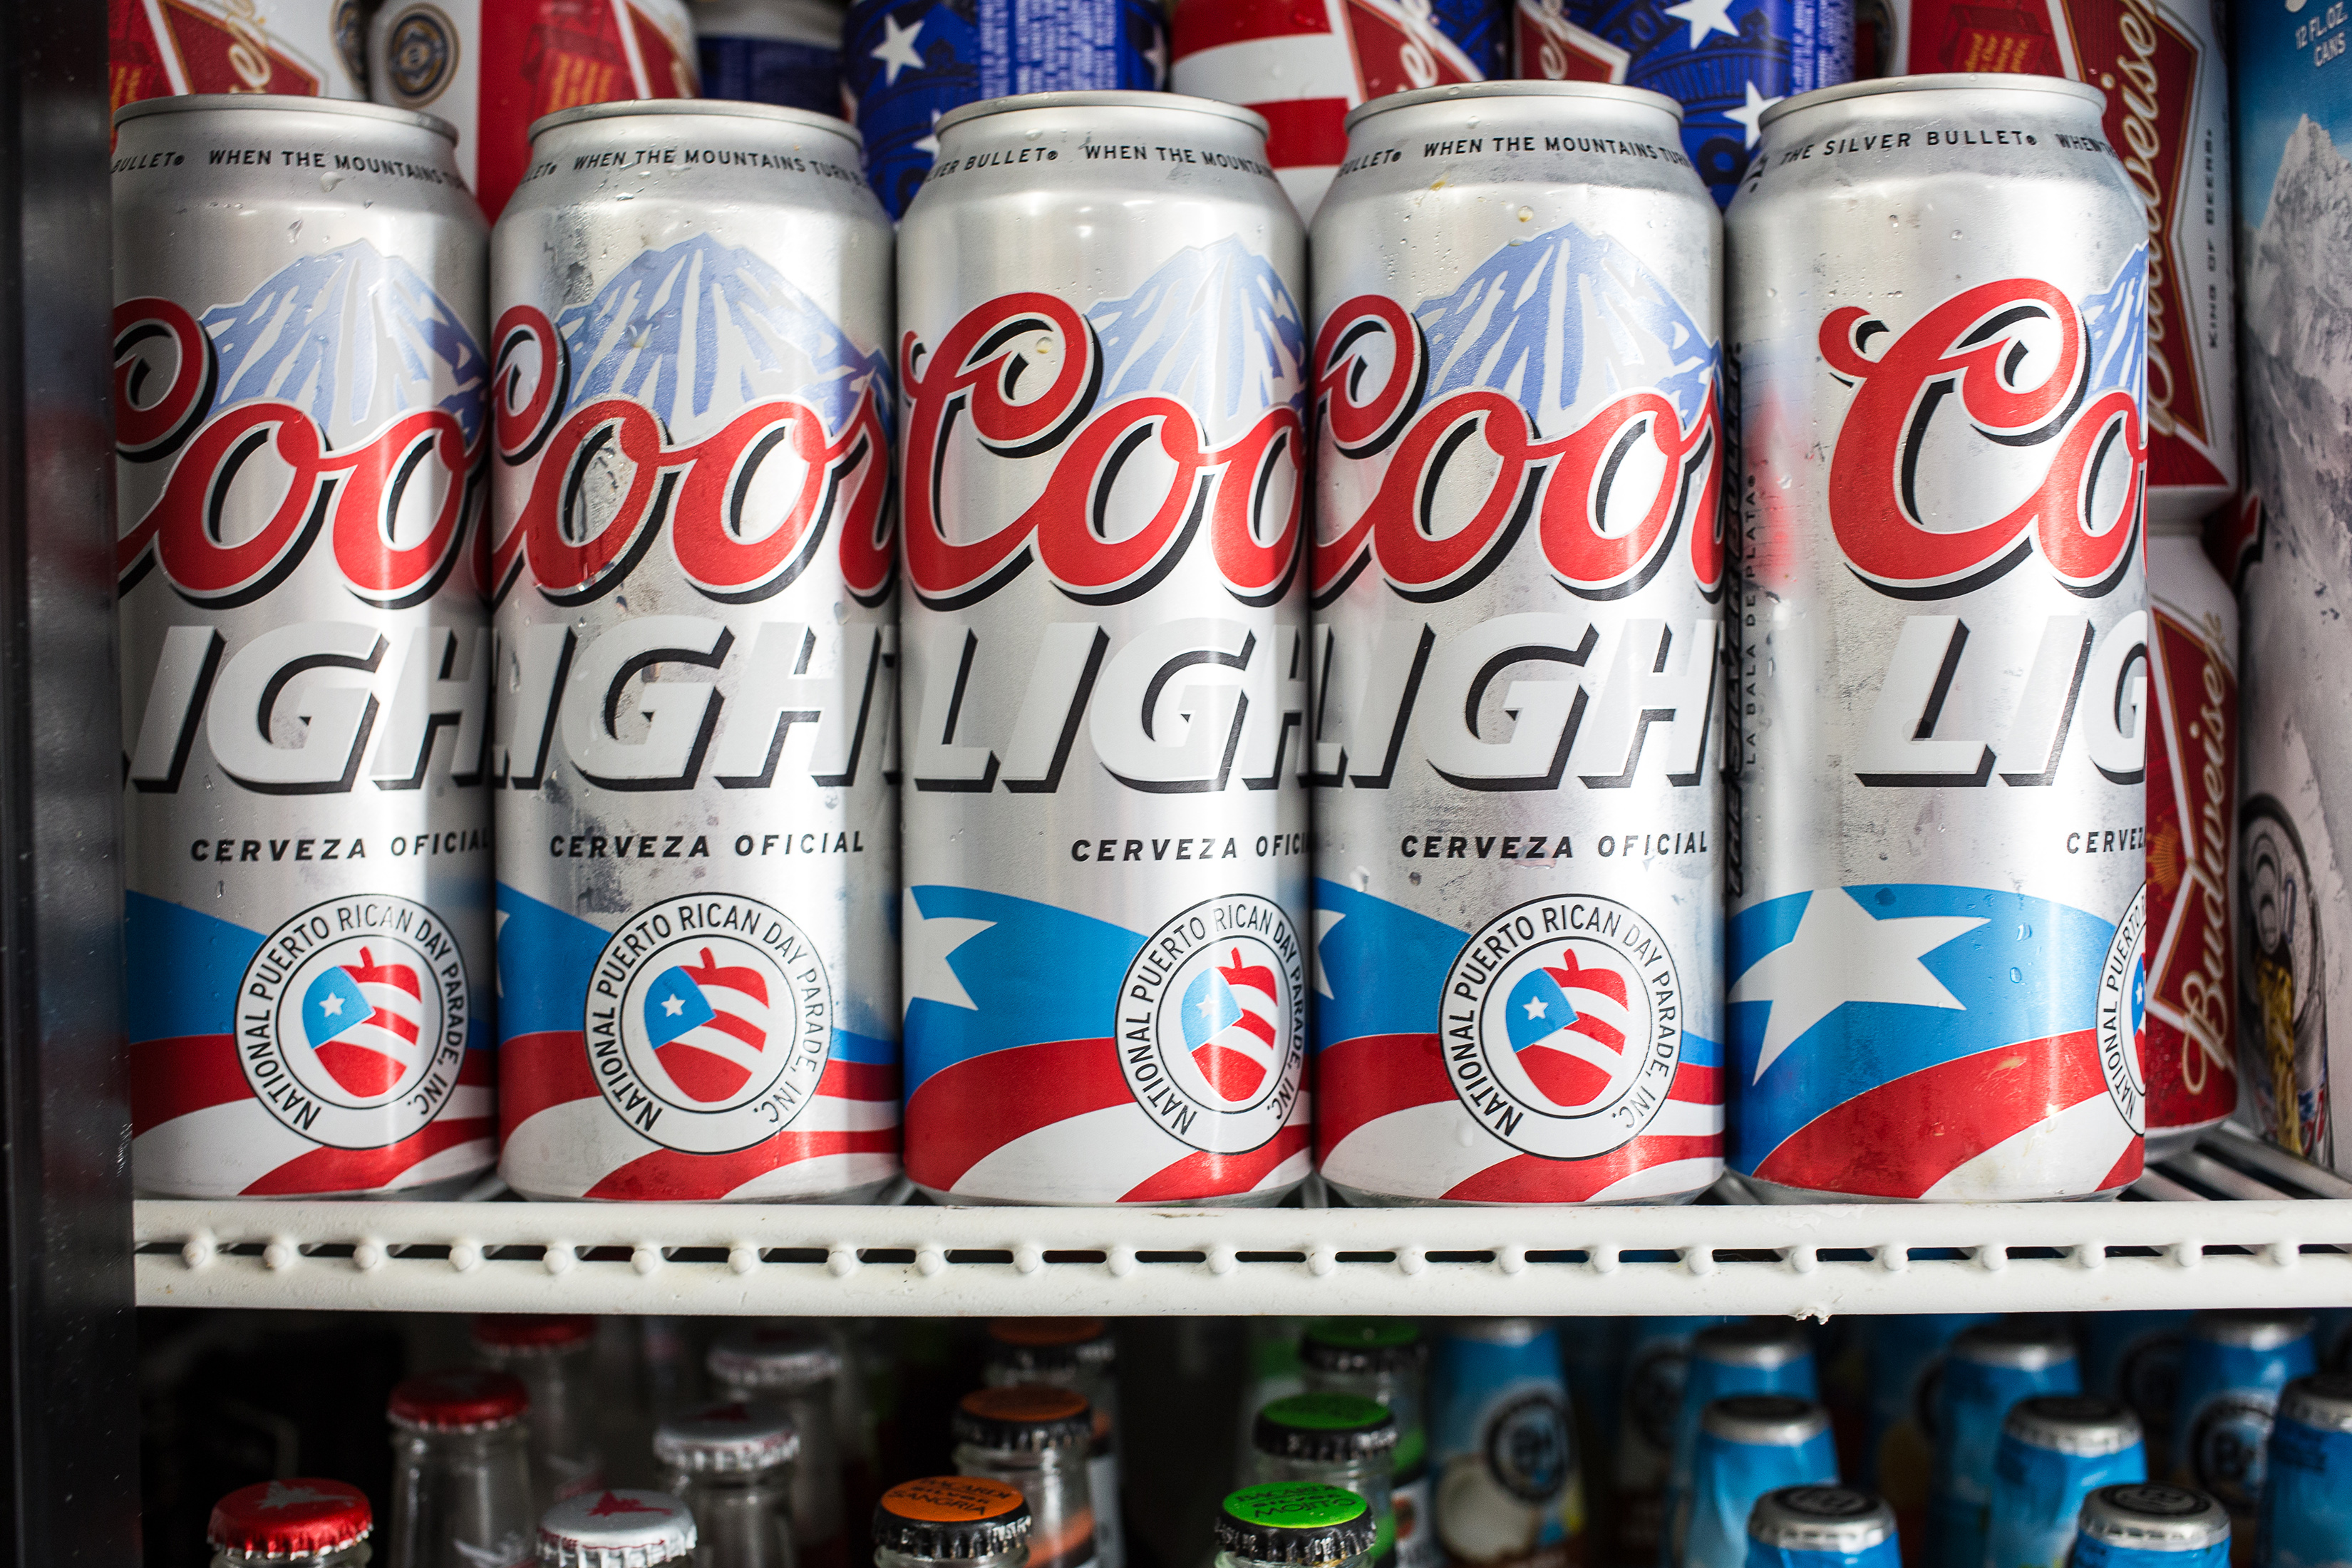 Coors aluminum beer cans in the cooler of a bodega, in New York, May 30, 2013. The Trump administration blames China for the decline of aluminum production in the U.S., but some of America's largest aluminum companies operate in Iceland. (Uli Seit/The New York Times)